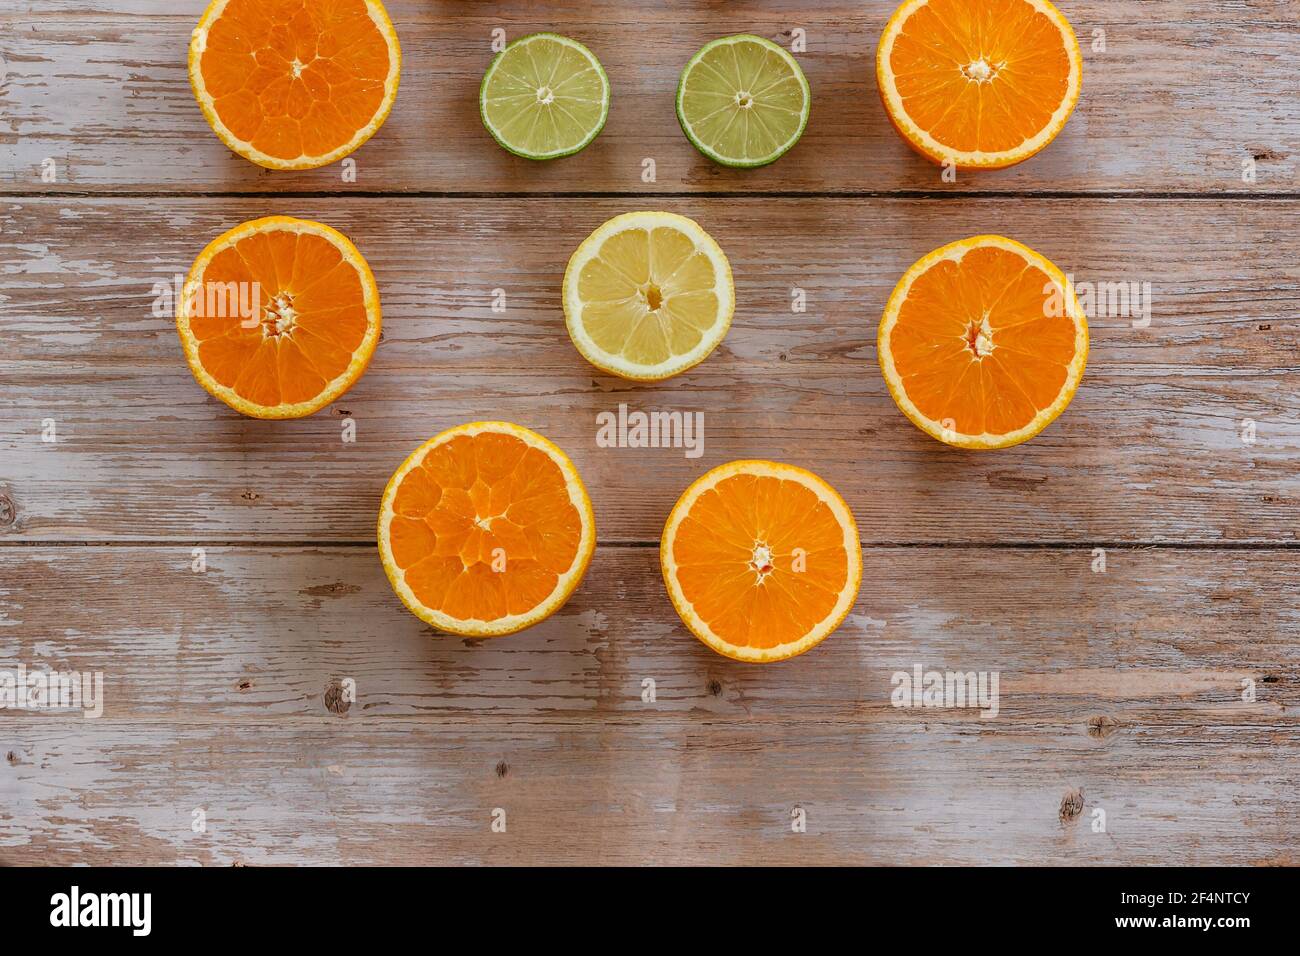 Oranges,limes and lemons slides on wooden table view from above.Beautiful background with fresh fruit half cut.Healthy eating vitamin C.Summer tropic Stock Photo